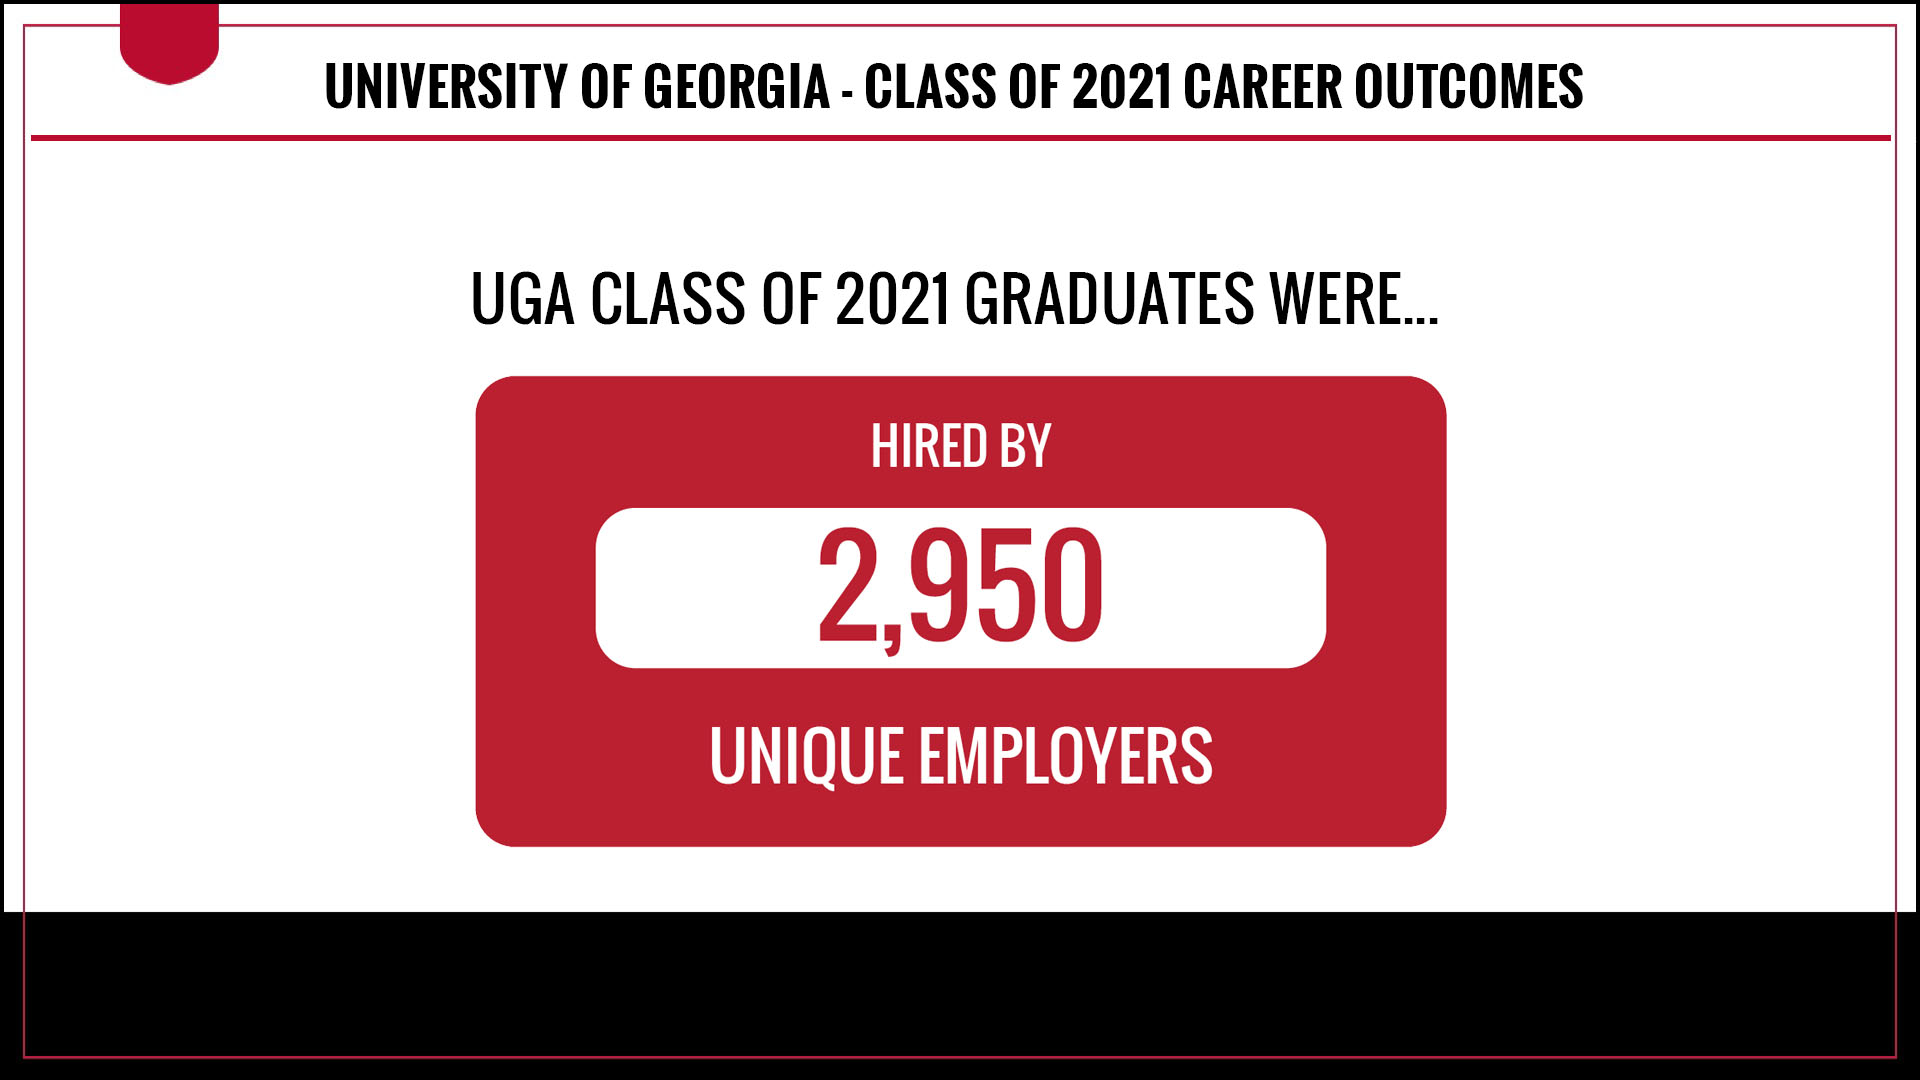 Class of 2021 graduates have been hired by 2950 unique employers